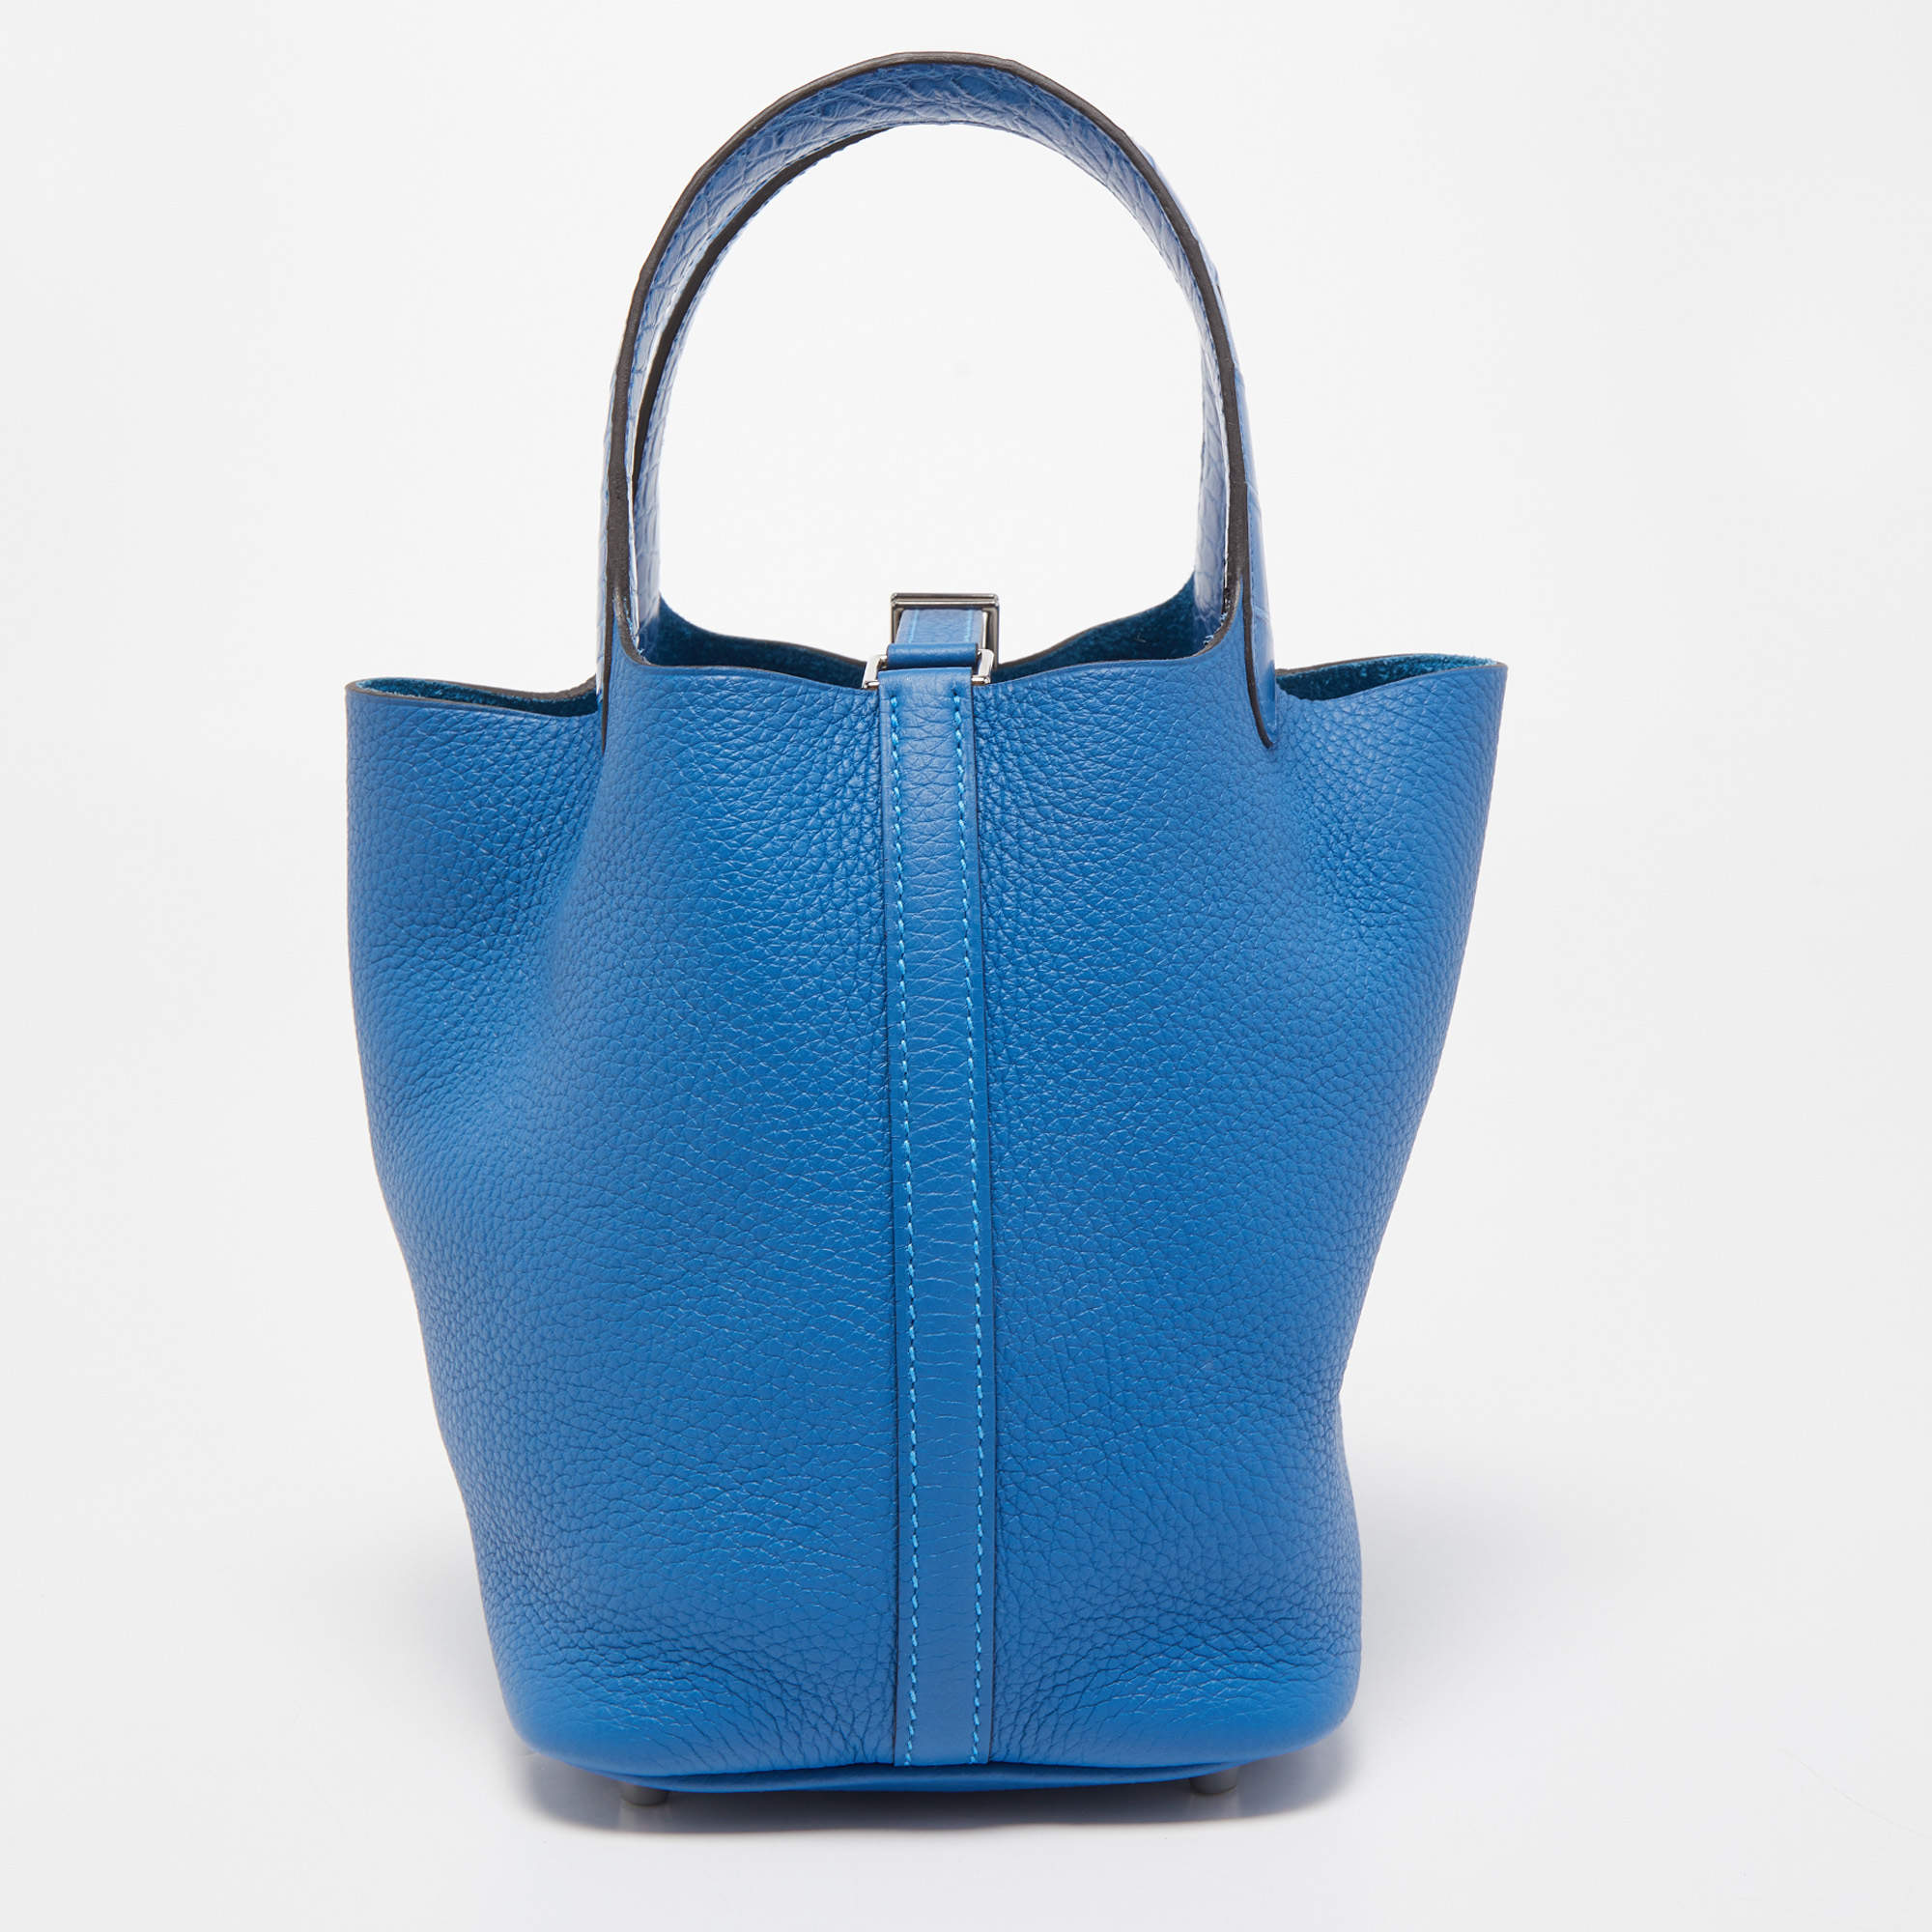 Hermes Bleu Electrique Taurillon Clemence Leather and Alligator Touch  Picotin Lock 22 Bag Hermes